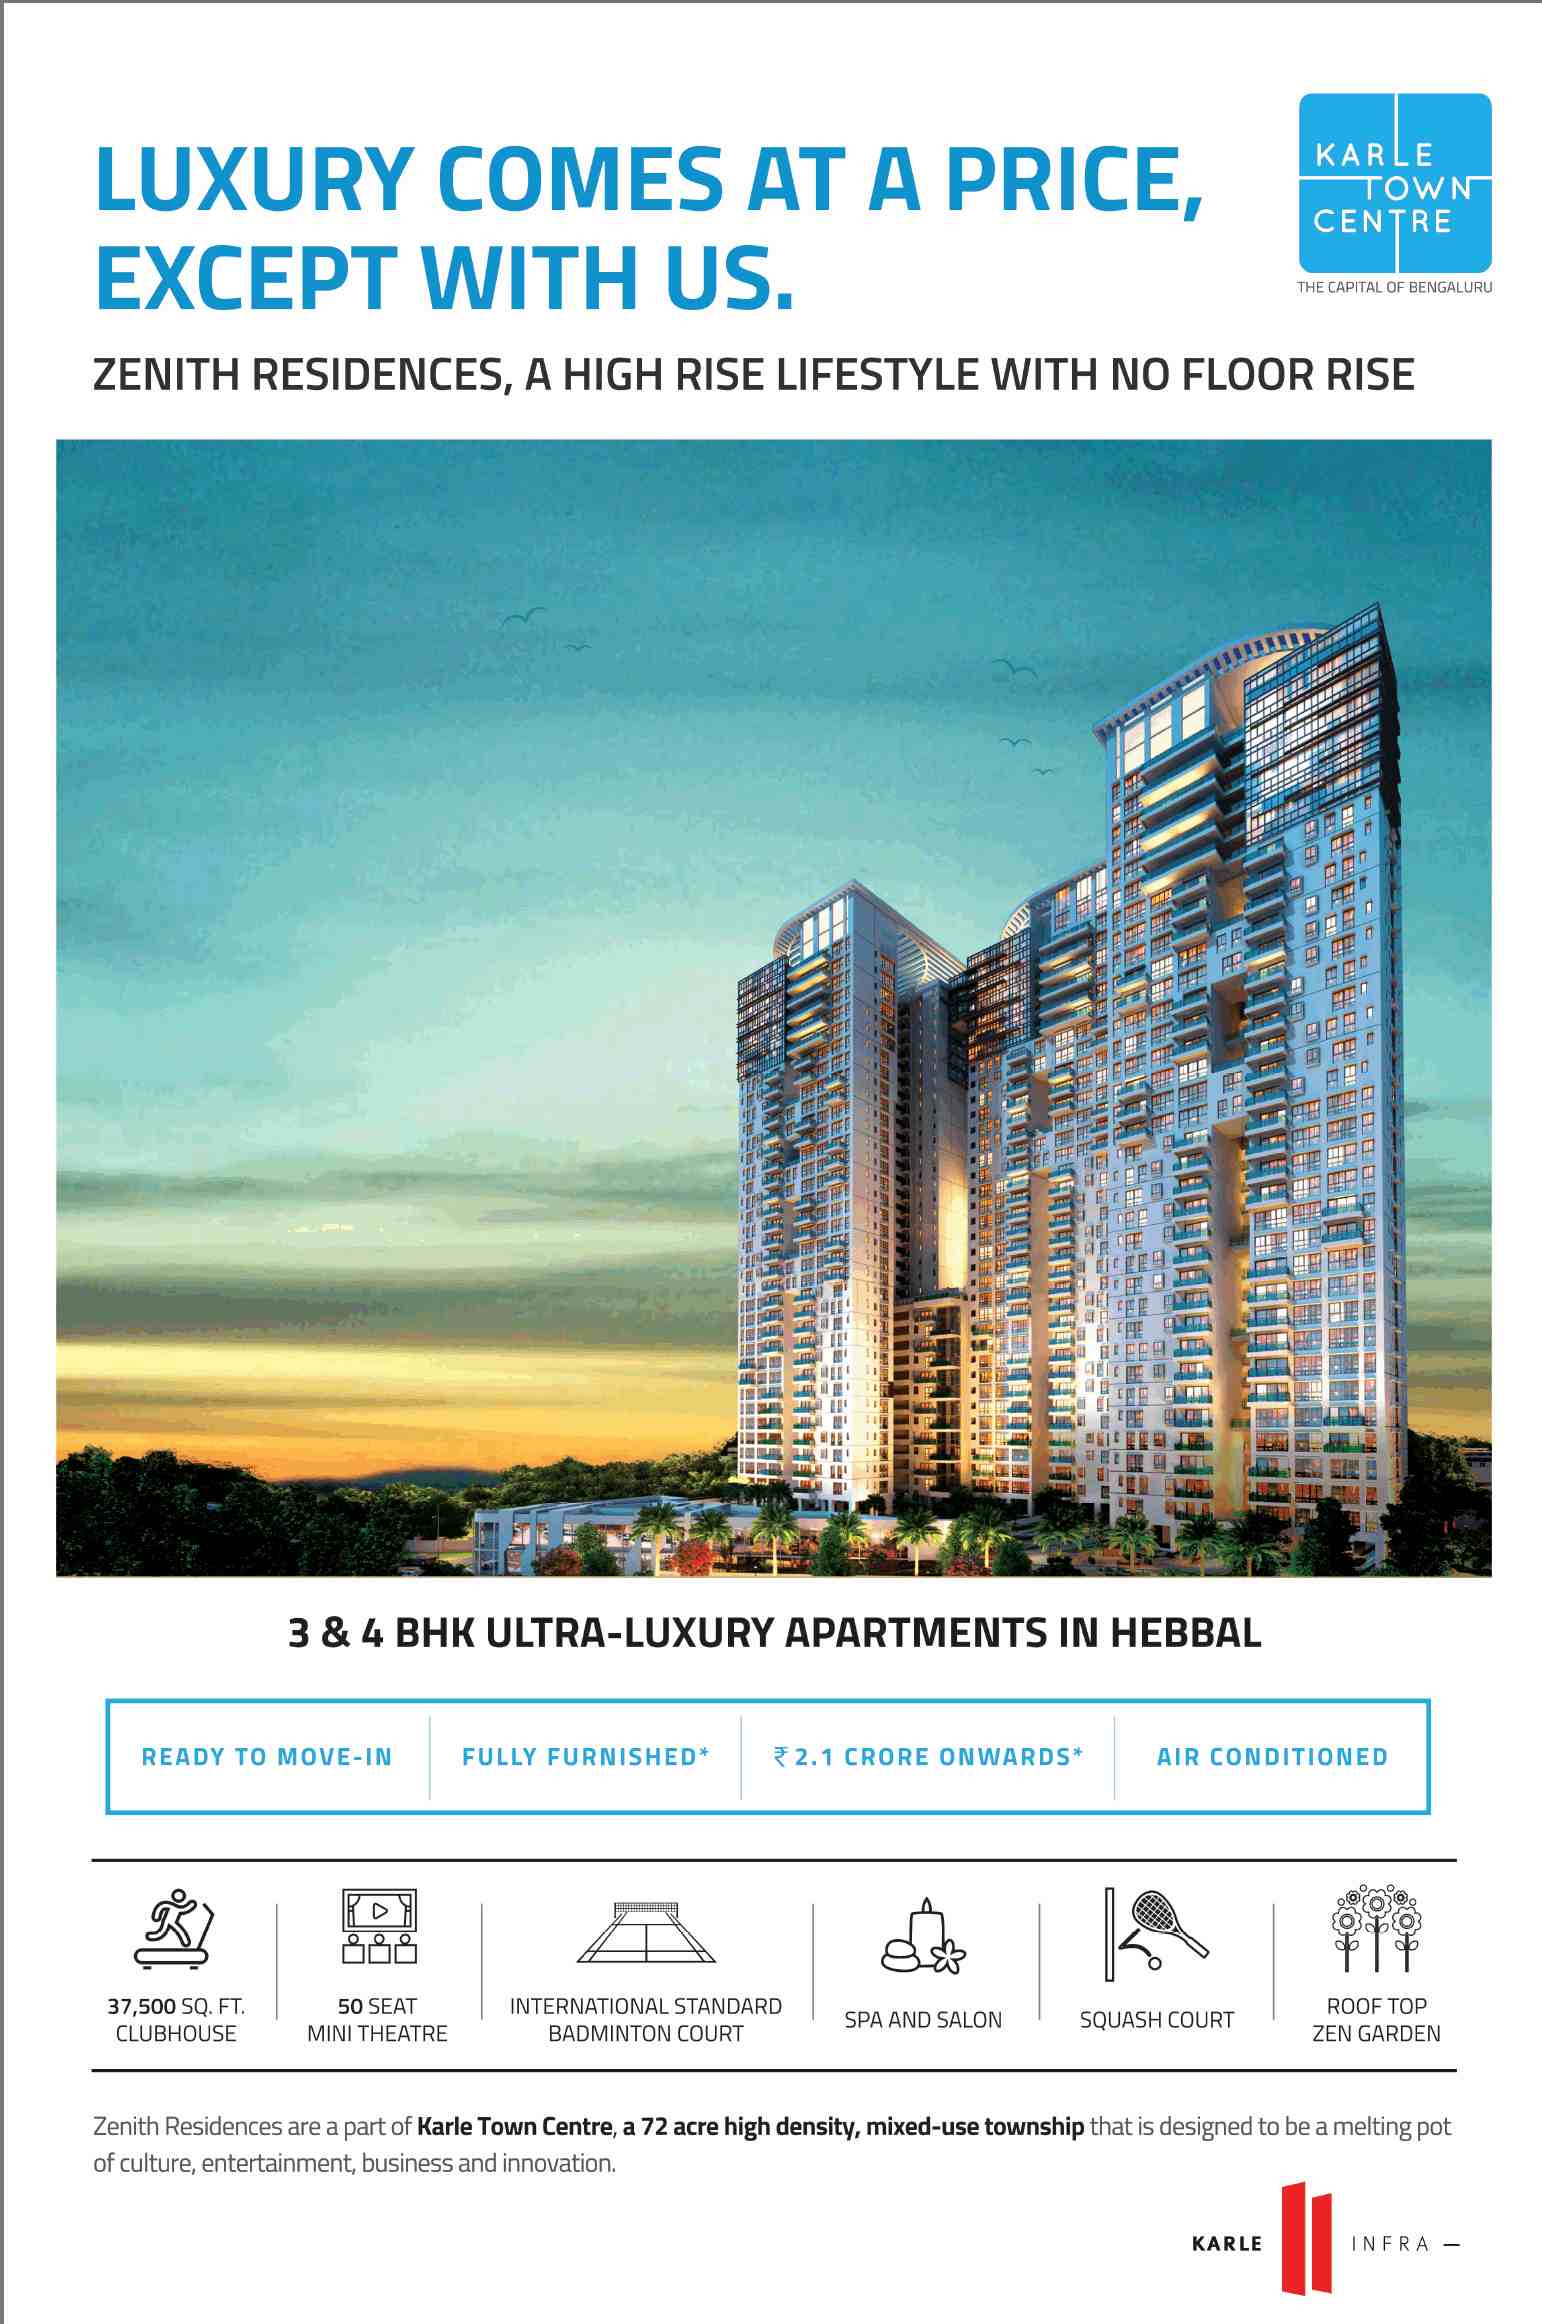 Live a high rise lifestyle with no floor rise at Karle Town Centre in Bangalore